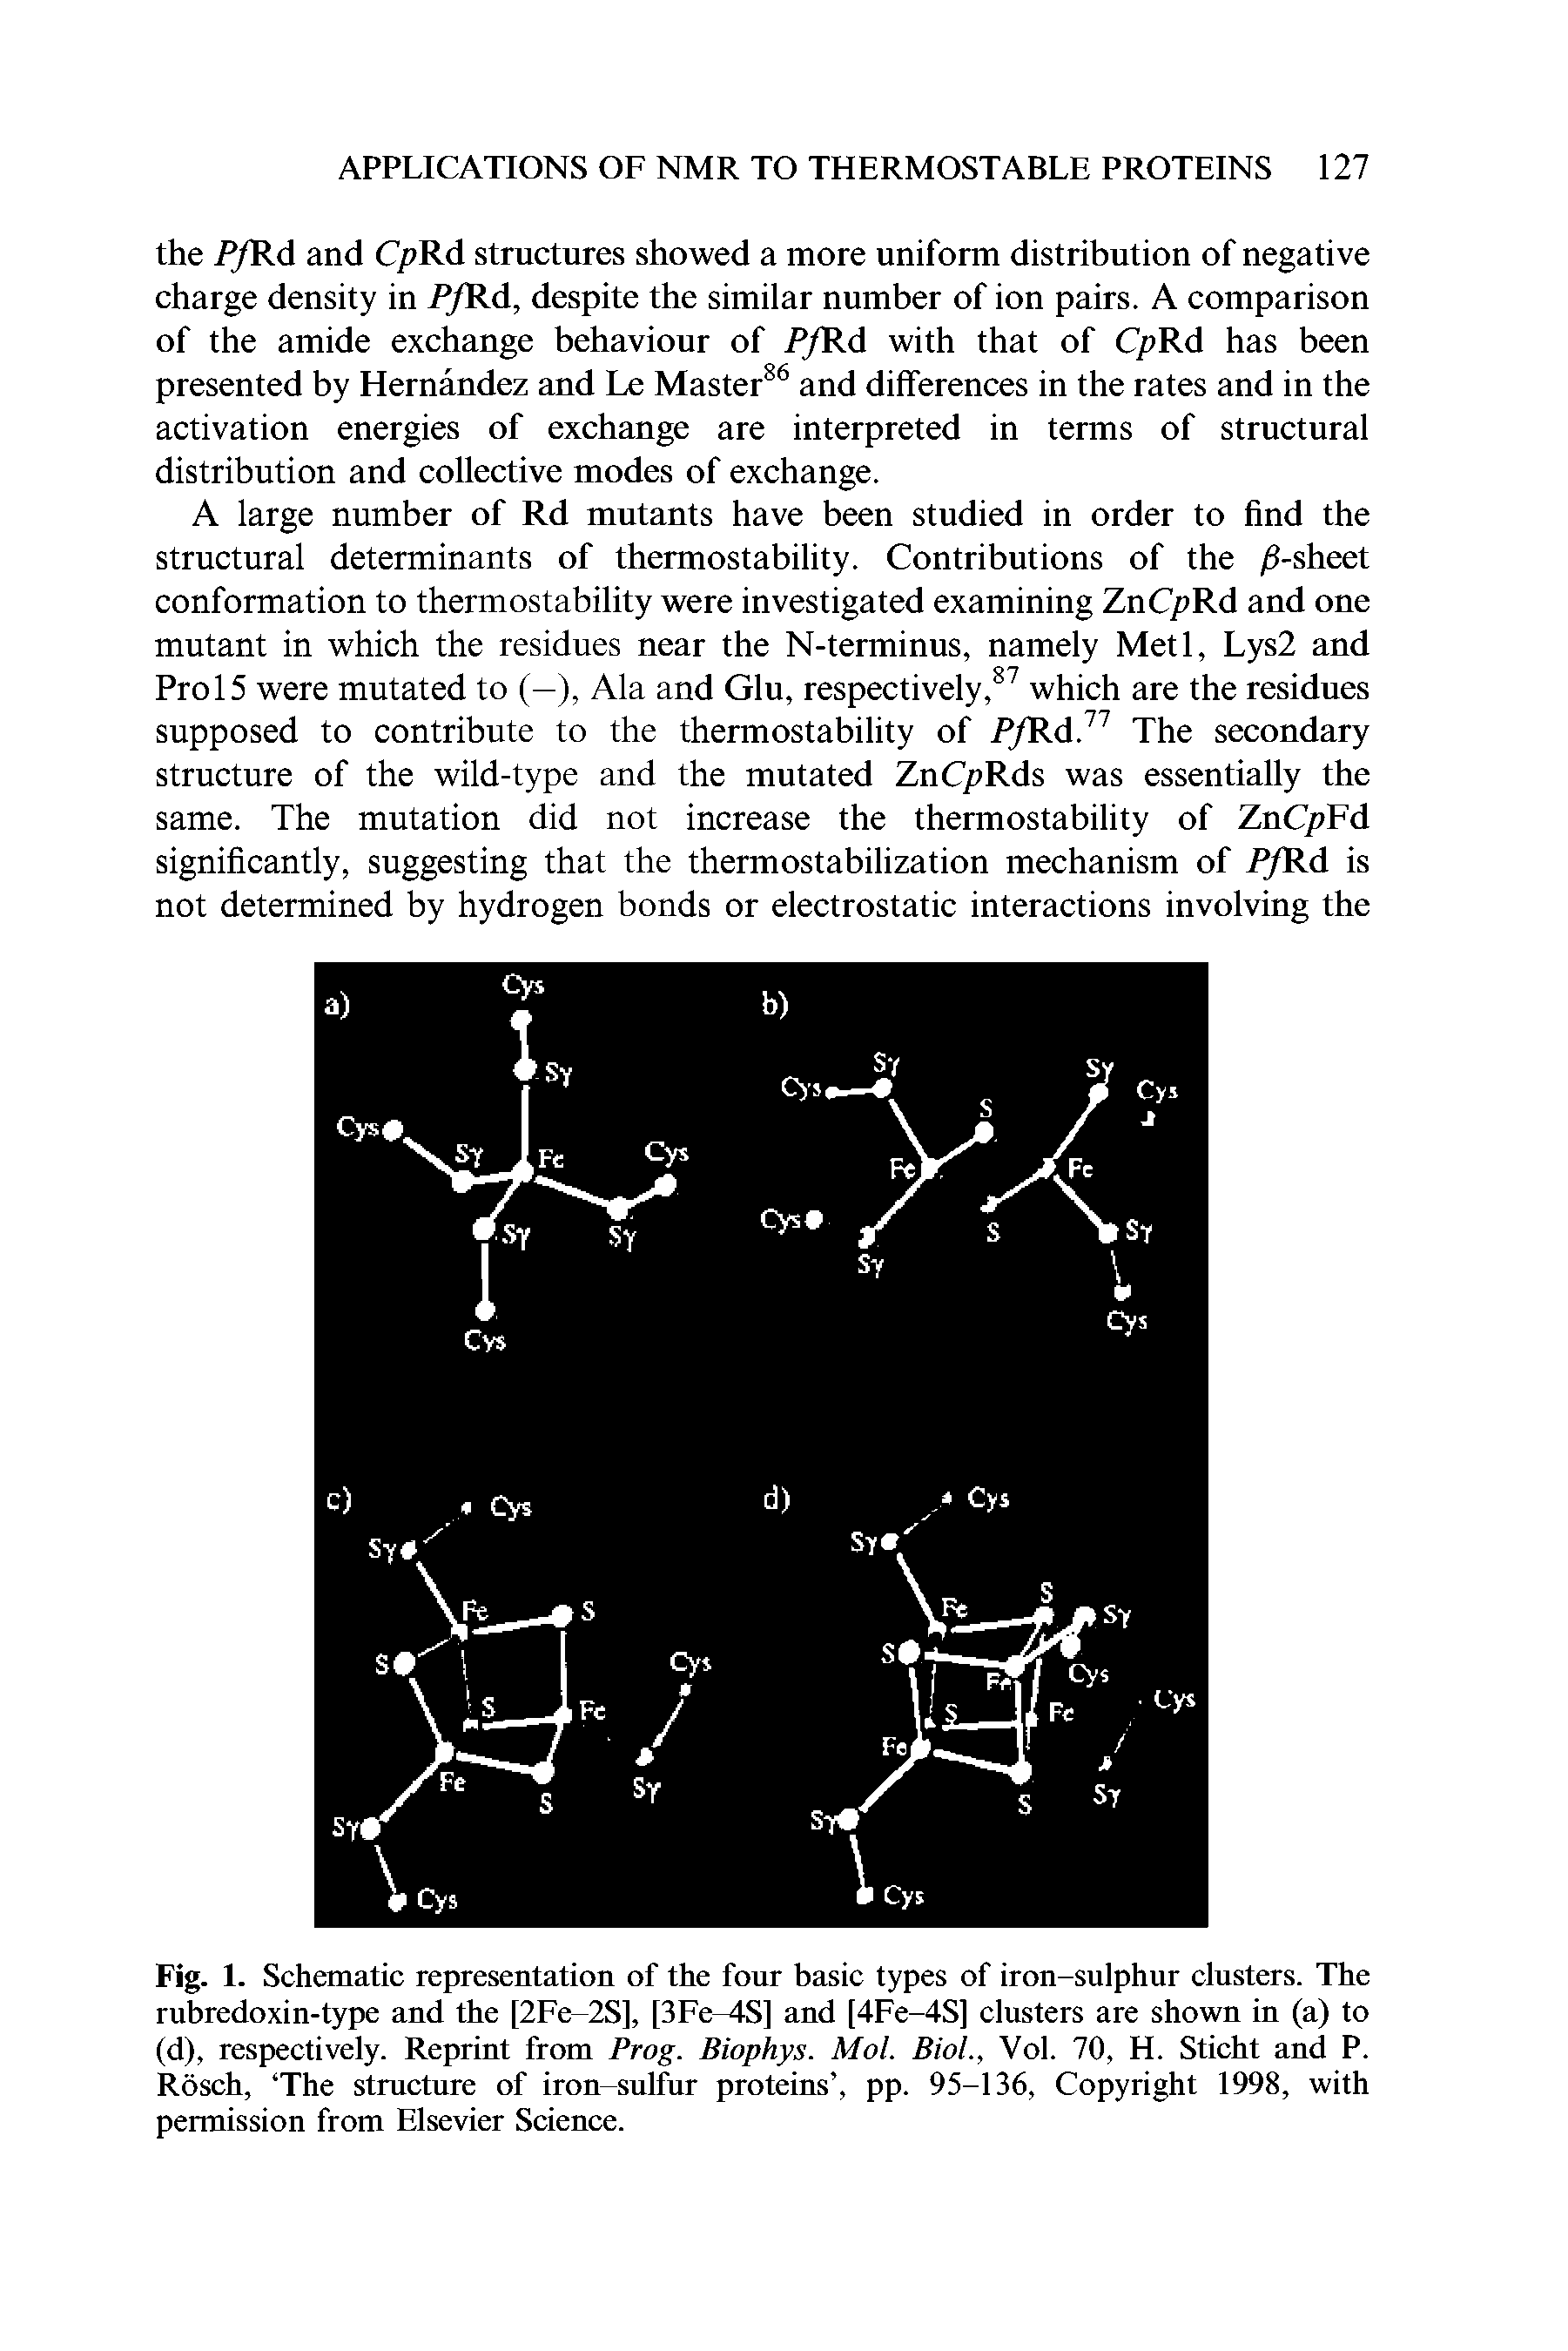 Fig. 1. Schematic representation of the four basic types of iron-sulphur clusters. The rubredoxin-type and the [2Fe-2S], [3Fe—4S] and [4Fe-4S] clusters are shown in (a) to (d), respectively. Reprint from Prog. Biophys. Mol. Biol., Vol. 70, H. Sticht and P. Rosch, The structure of iron-sulfur proteins , pp. 95-136, Copyright 1998, with permission from Elsevier Science.